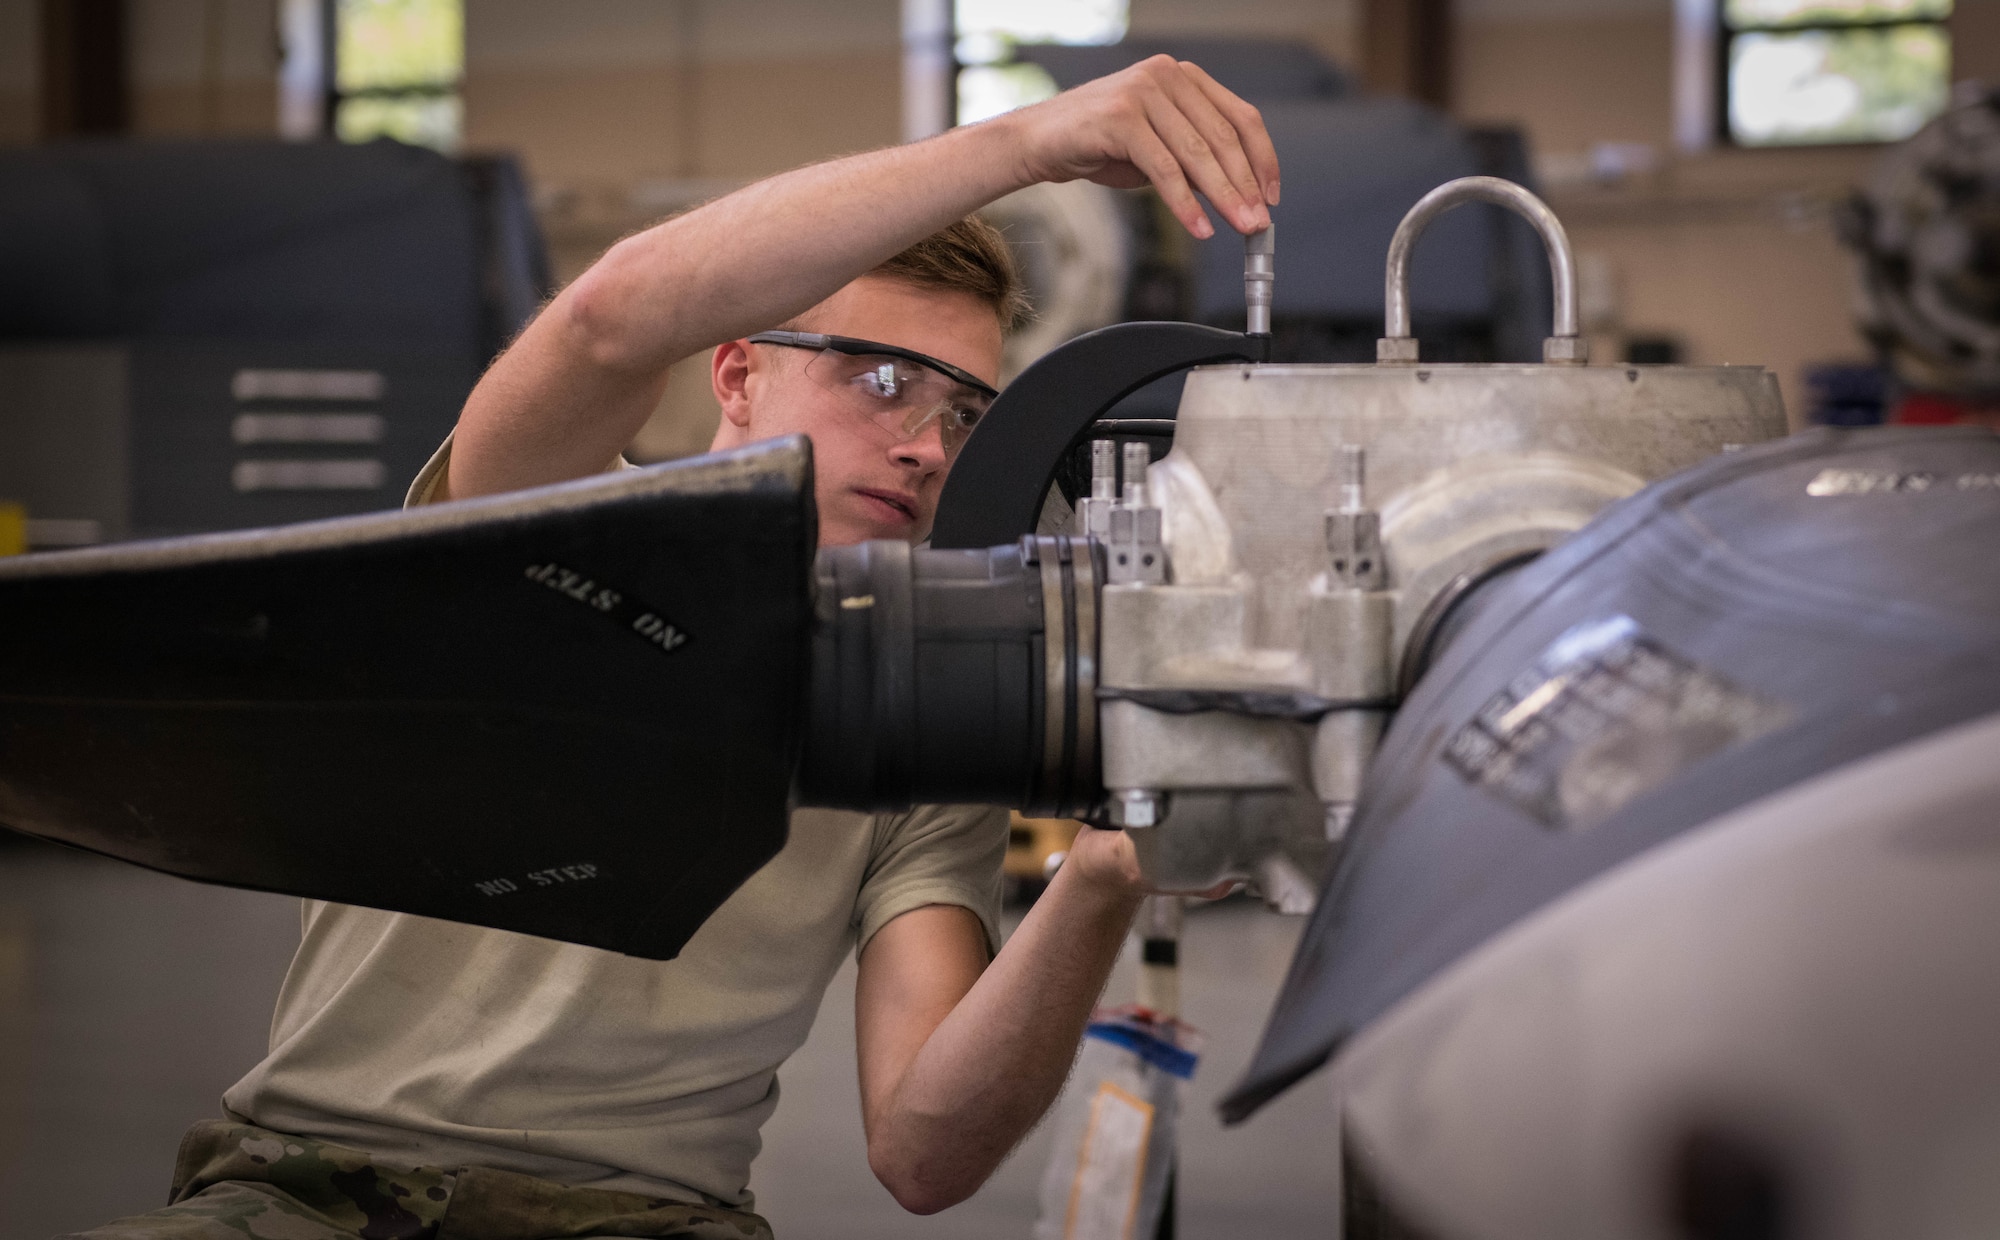 Senior Airman Sean Kenny, an aerospace propulsion technician assigned to the the 910th Maintenance Squadron, assembles the hub and blades on a test post, Aug. 11, 2019 at Youngstown Air Reserve Station.